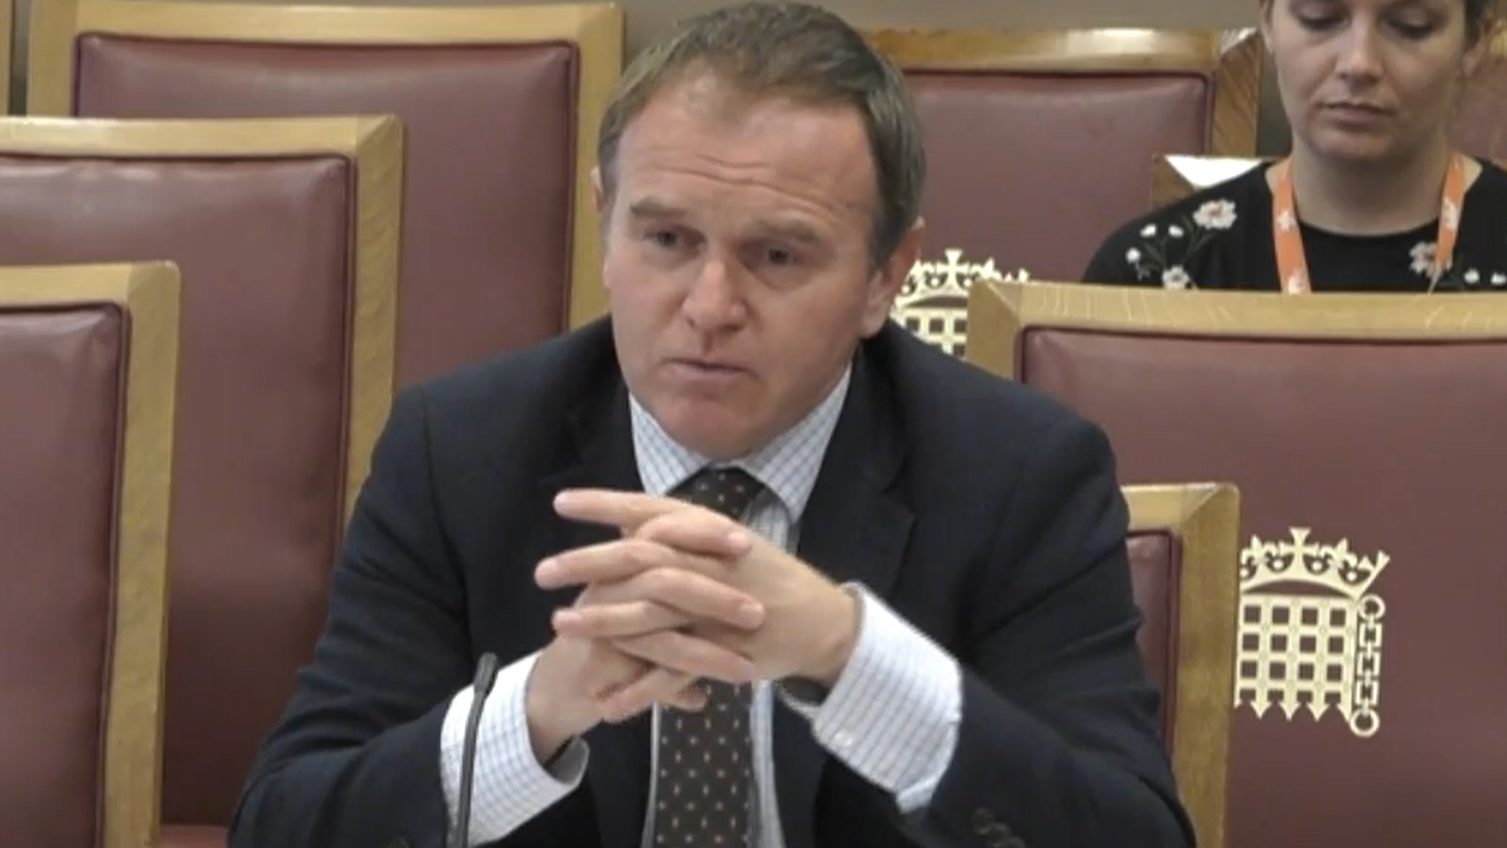 Environment Minister George Eustice